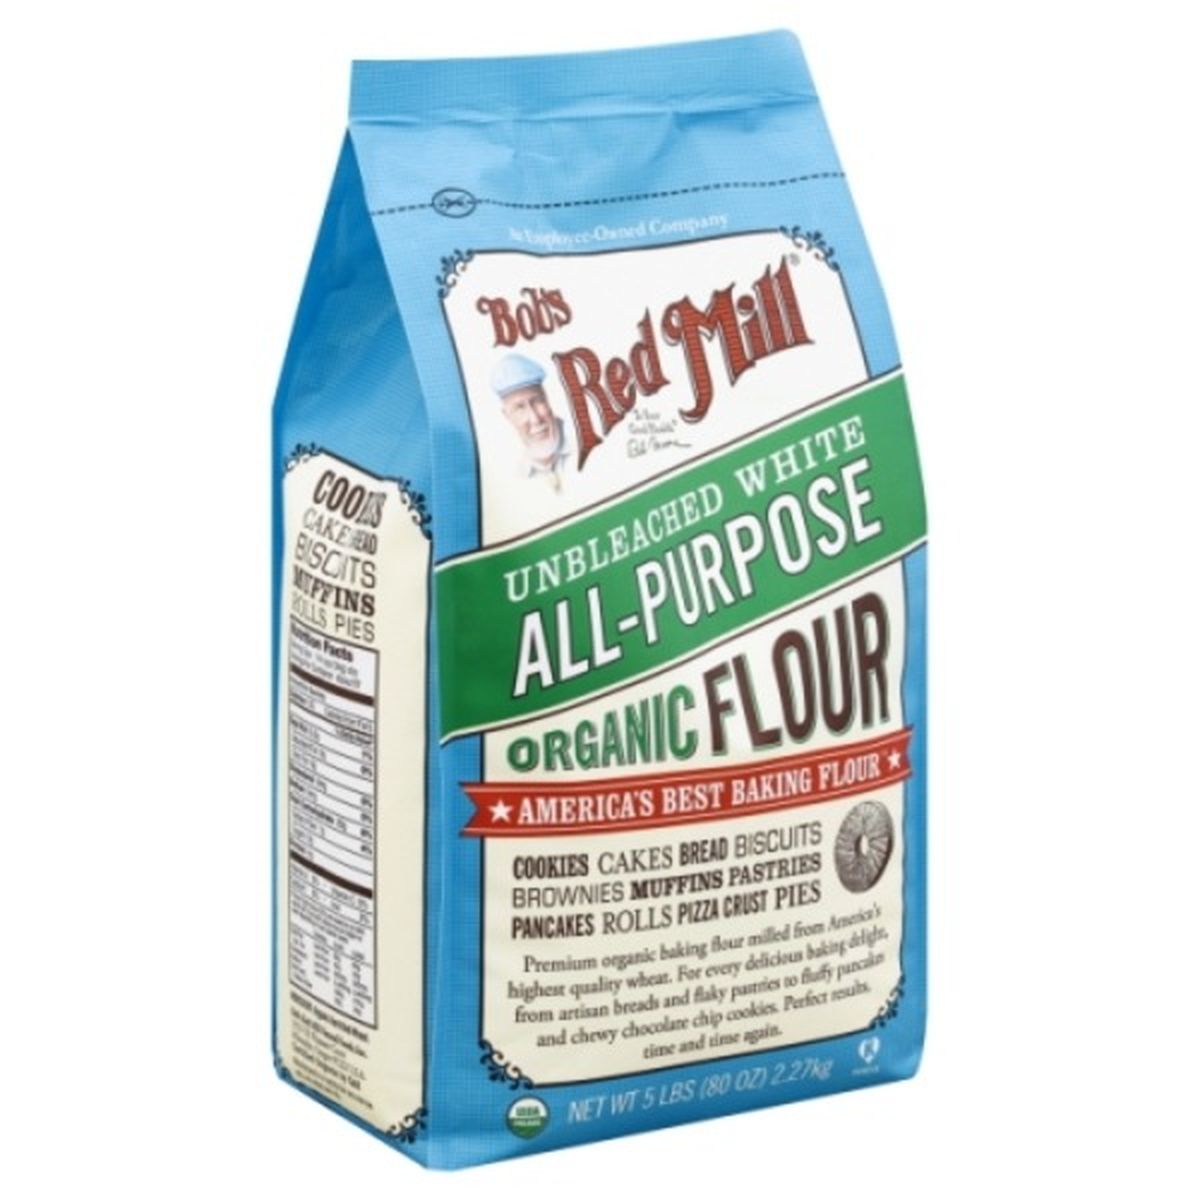 Calories in Bob's Red Mill Flour, Organic, All-Purpose, Unbleached White